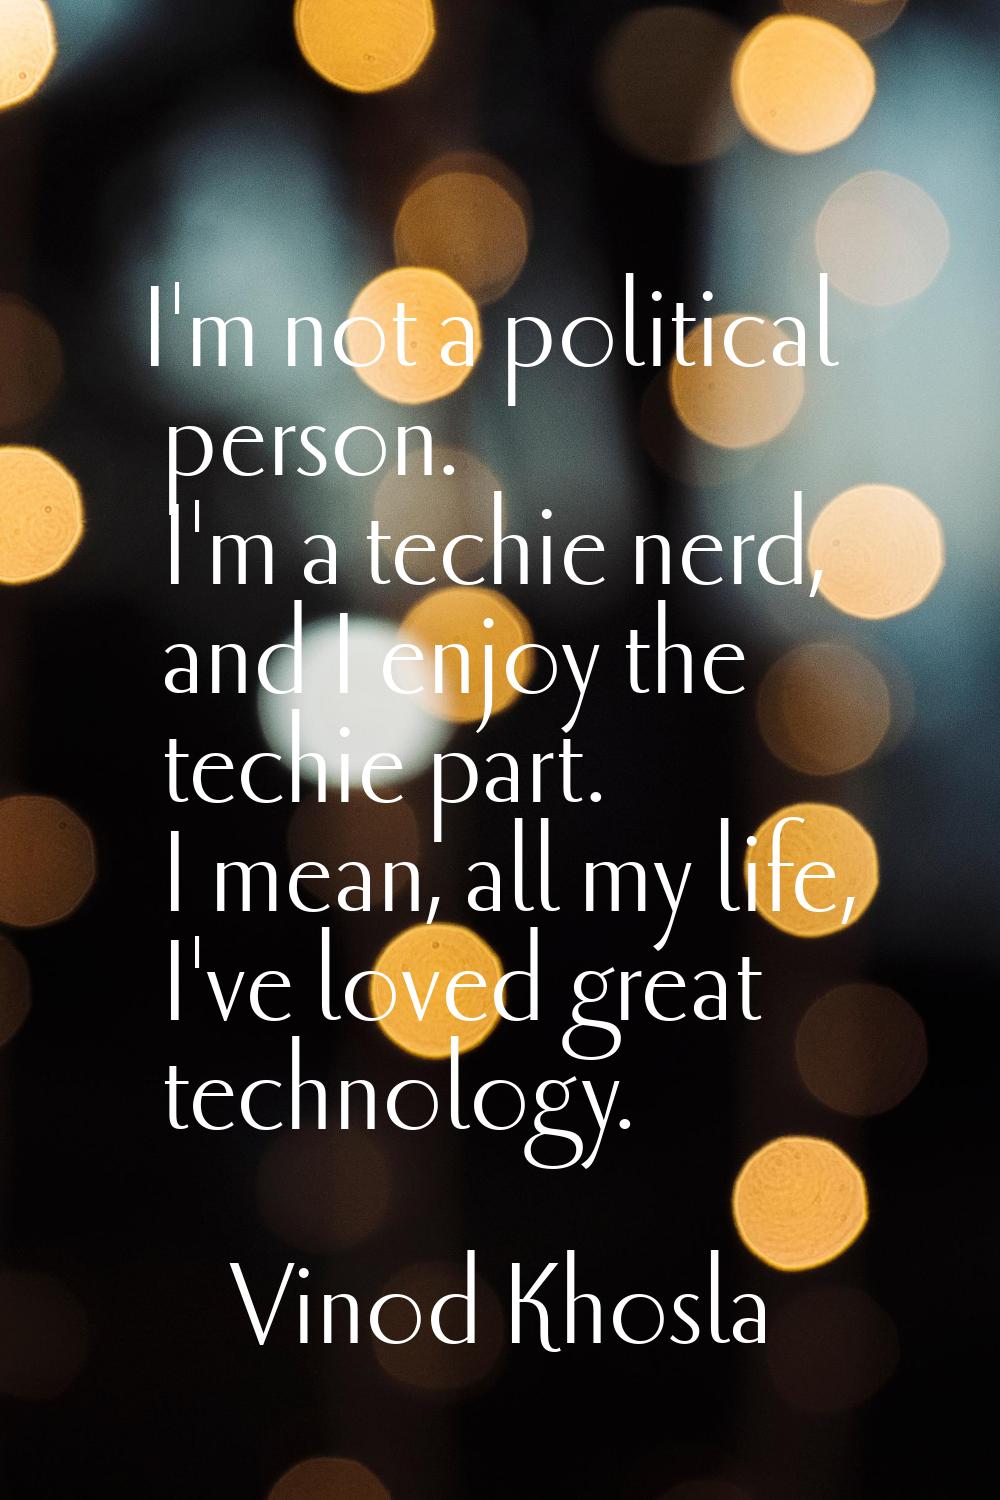 I'm not a political person. I'm a techie nerd, and I enjoy the techie part. I mean, all my life, I'